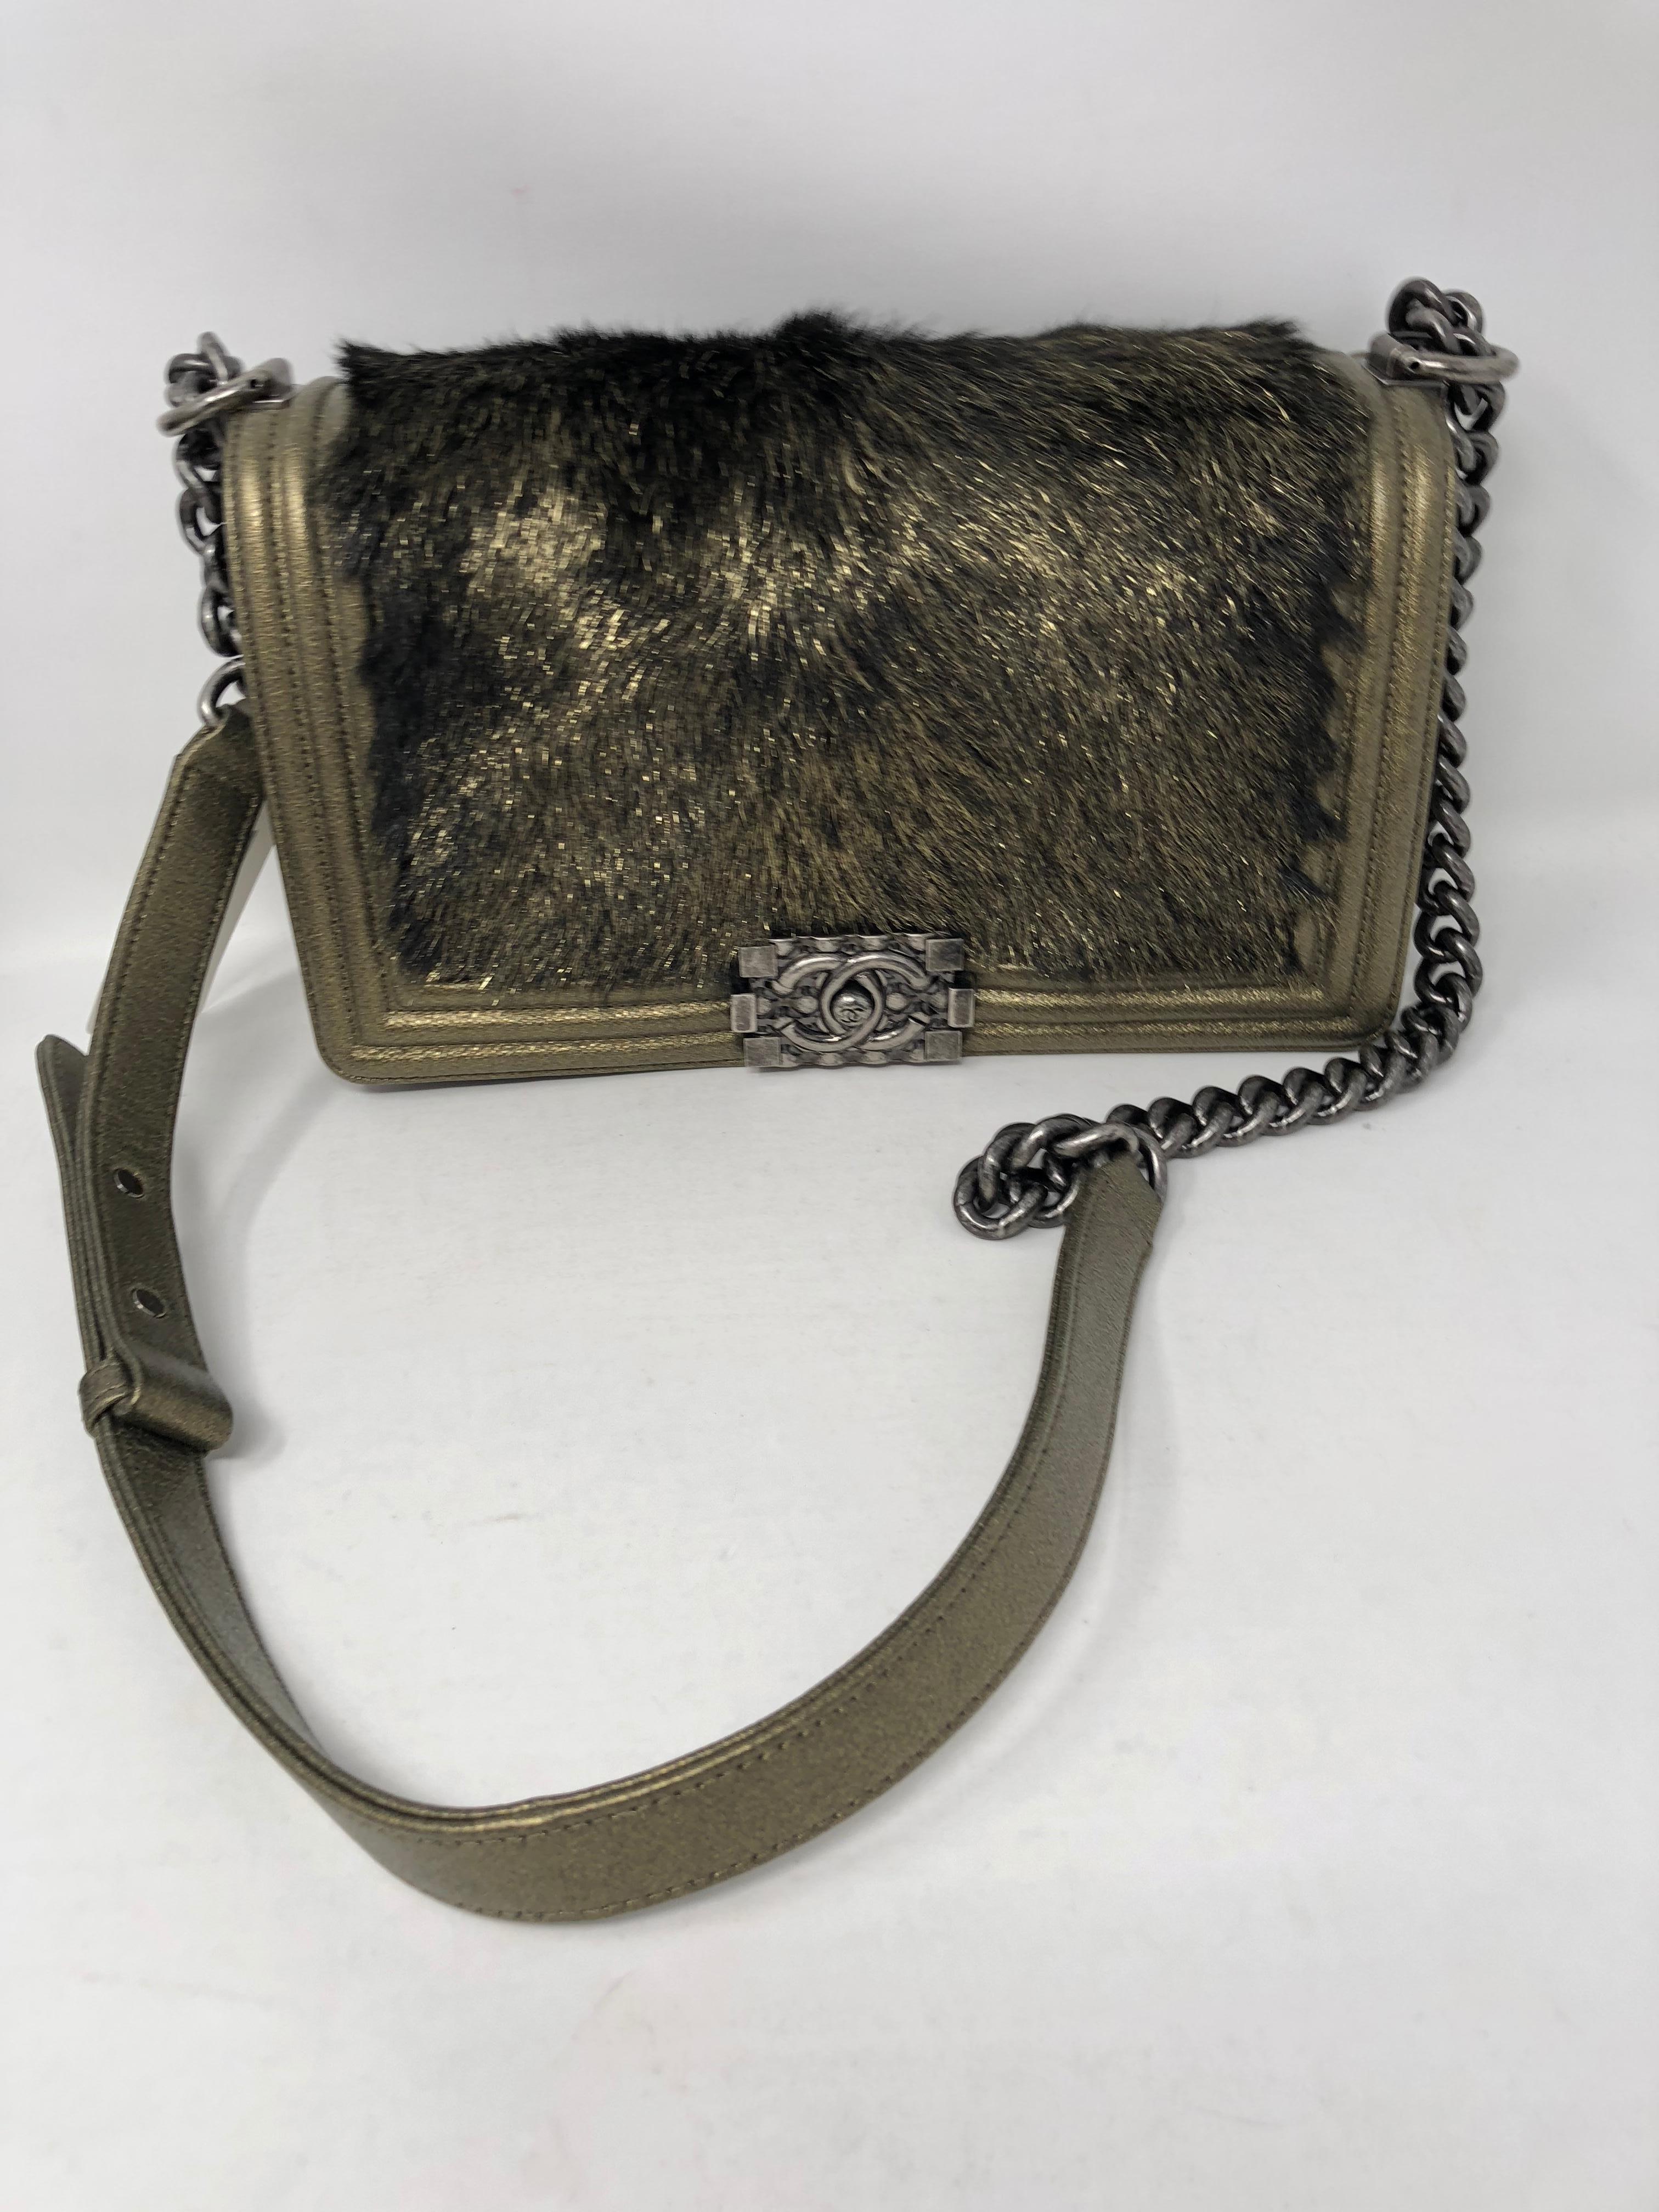 Chanel Gold and Black Fur Boy FlapBag. Metallic gold leather in medium size Boy. Original tag of $4700 still on the purse. Never used. Brand new condition. Cool fur on front next to all the metallic leather makes this a very unique bag. Can be worn